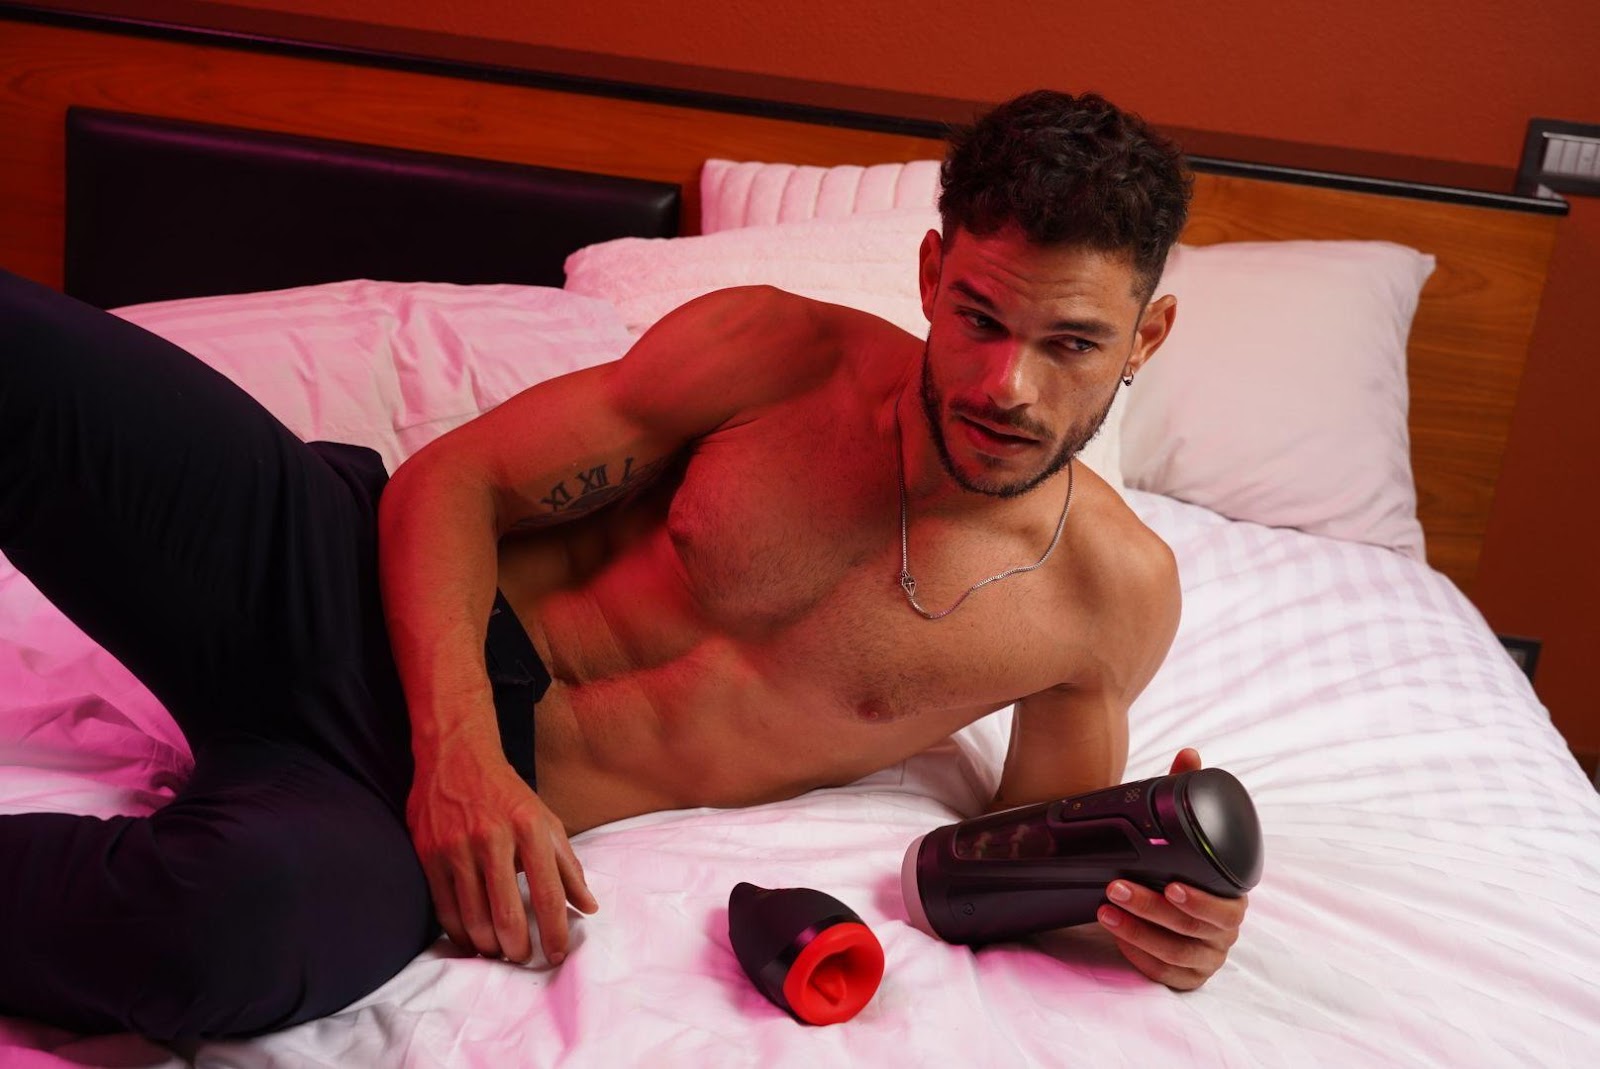 Porn Blog: Male Sex Toys with Remote Controls. If you want to remotely enjoy your toy in your home or with a partner with their finger on the button. These male sex toys can be an option for you. If you’ve ever...